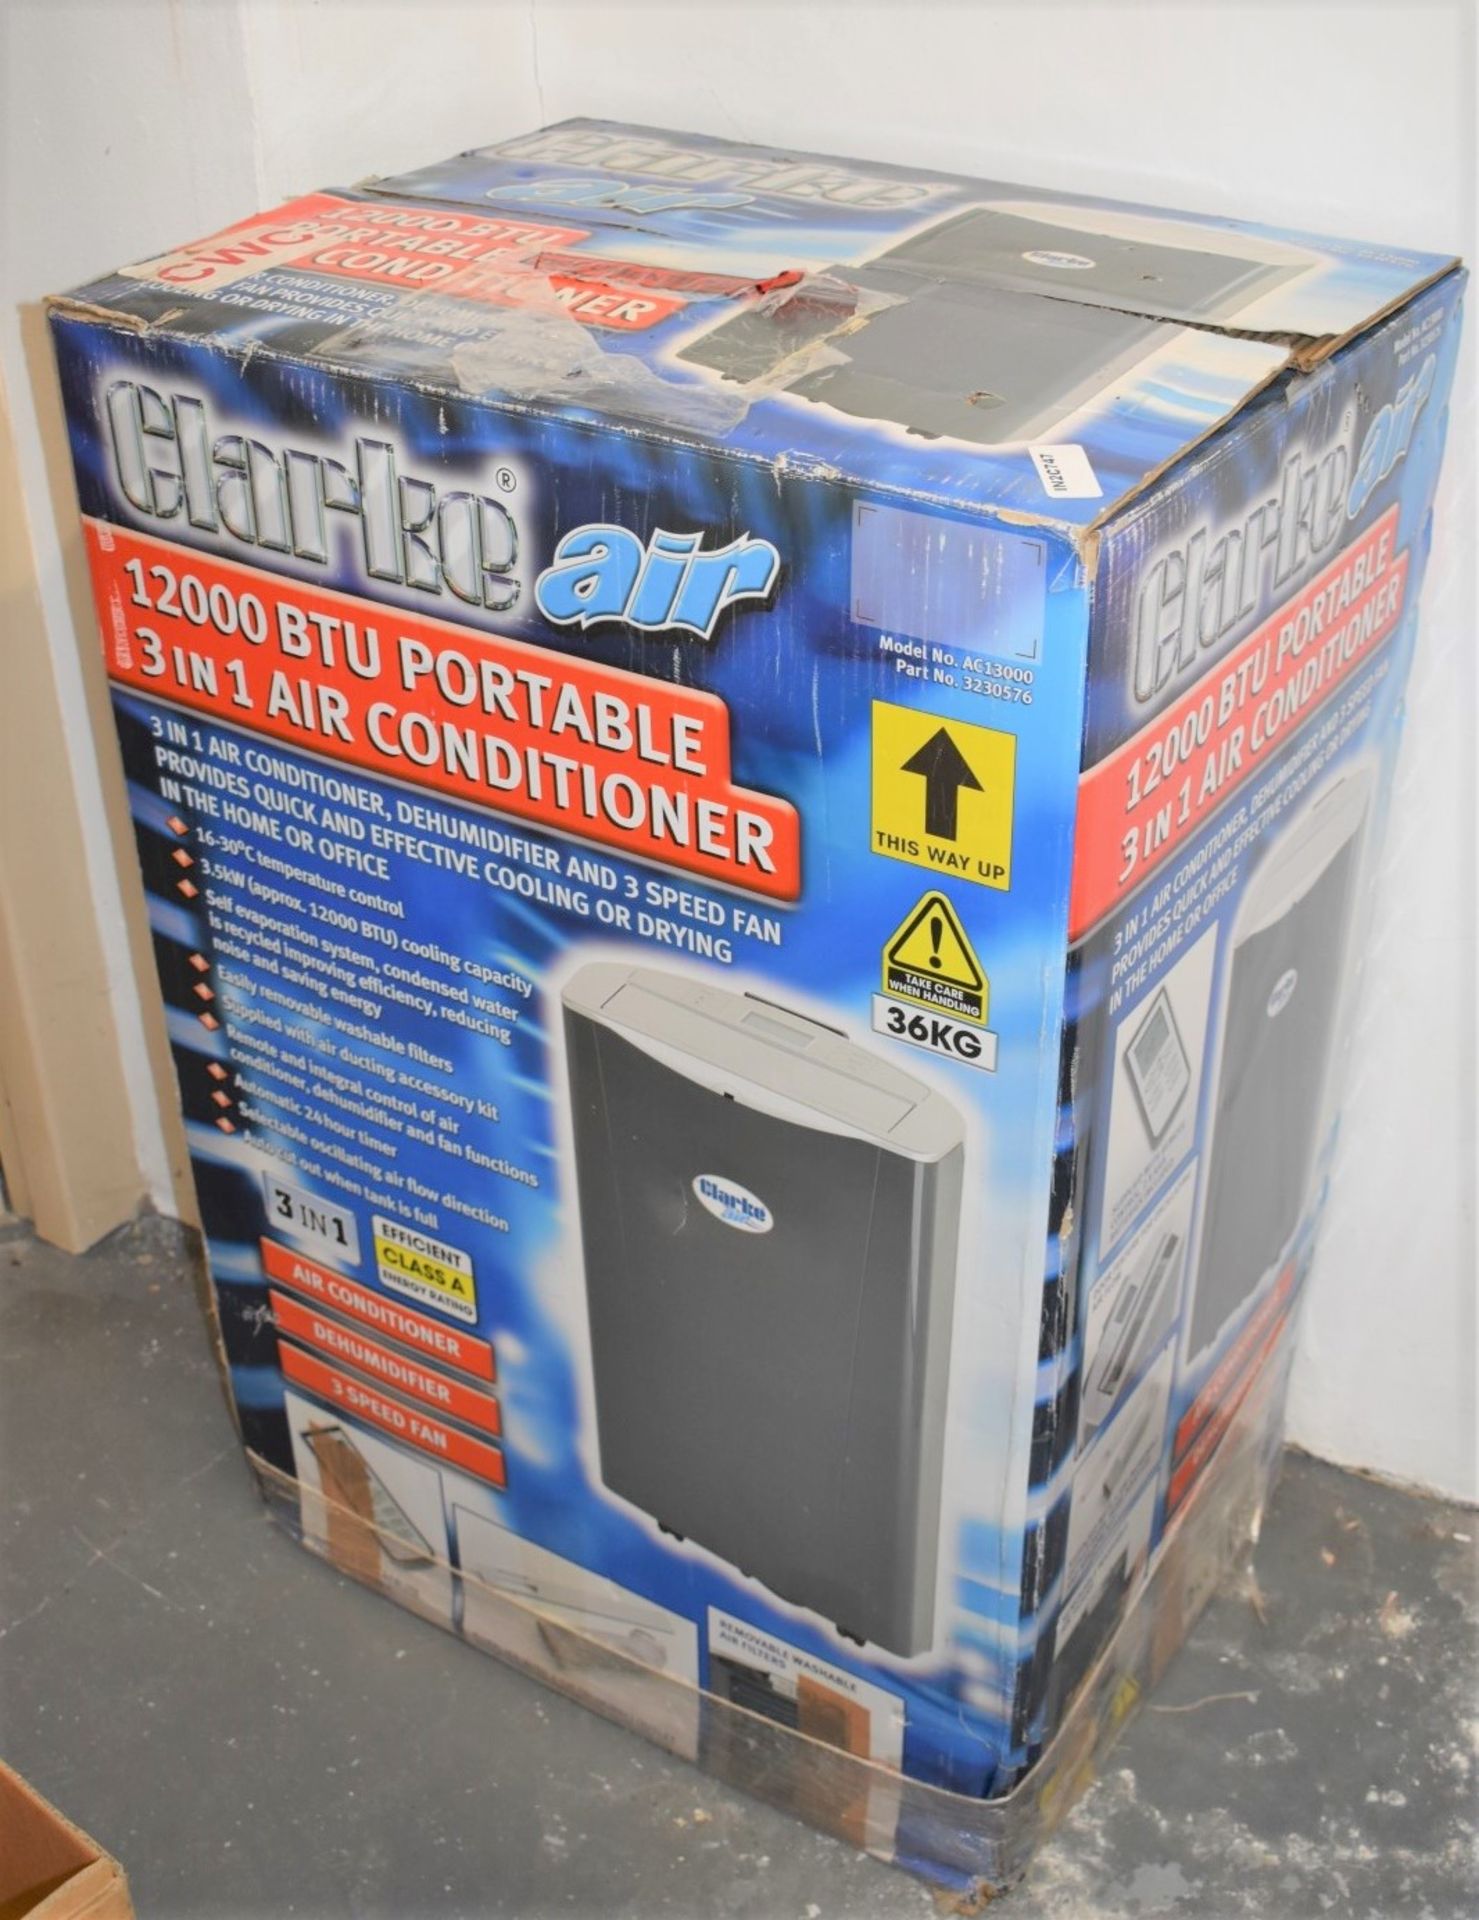 1 x Clarke AC13000 Cooling Only Air Conditioner With Dehumidifier 3 Speed Fan and Remote Control - Image 4 of 5